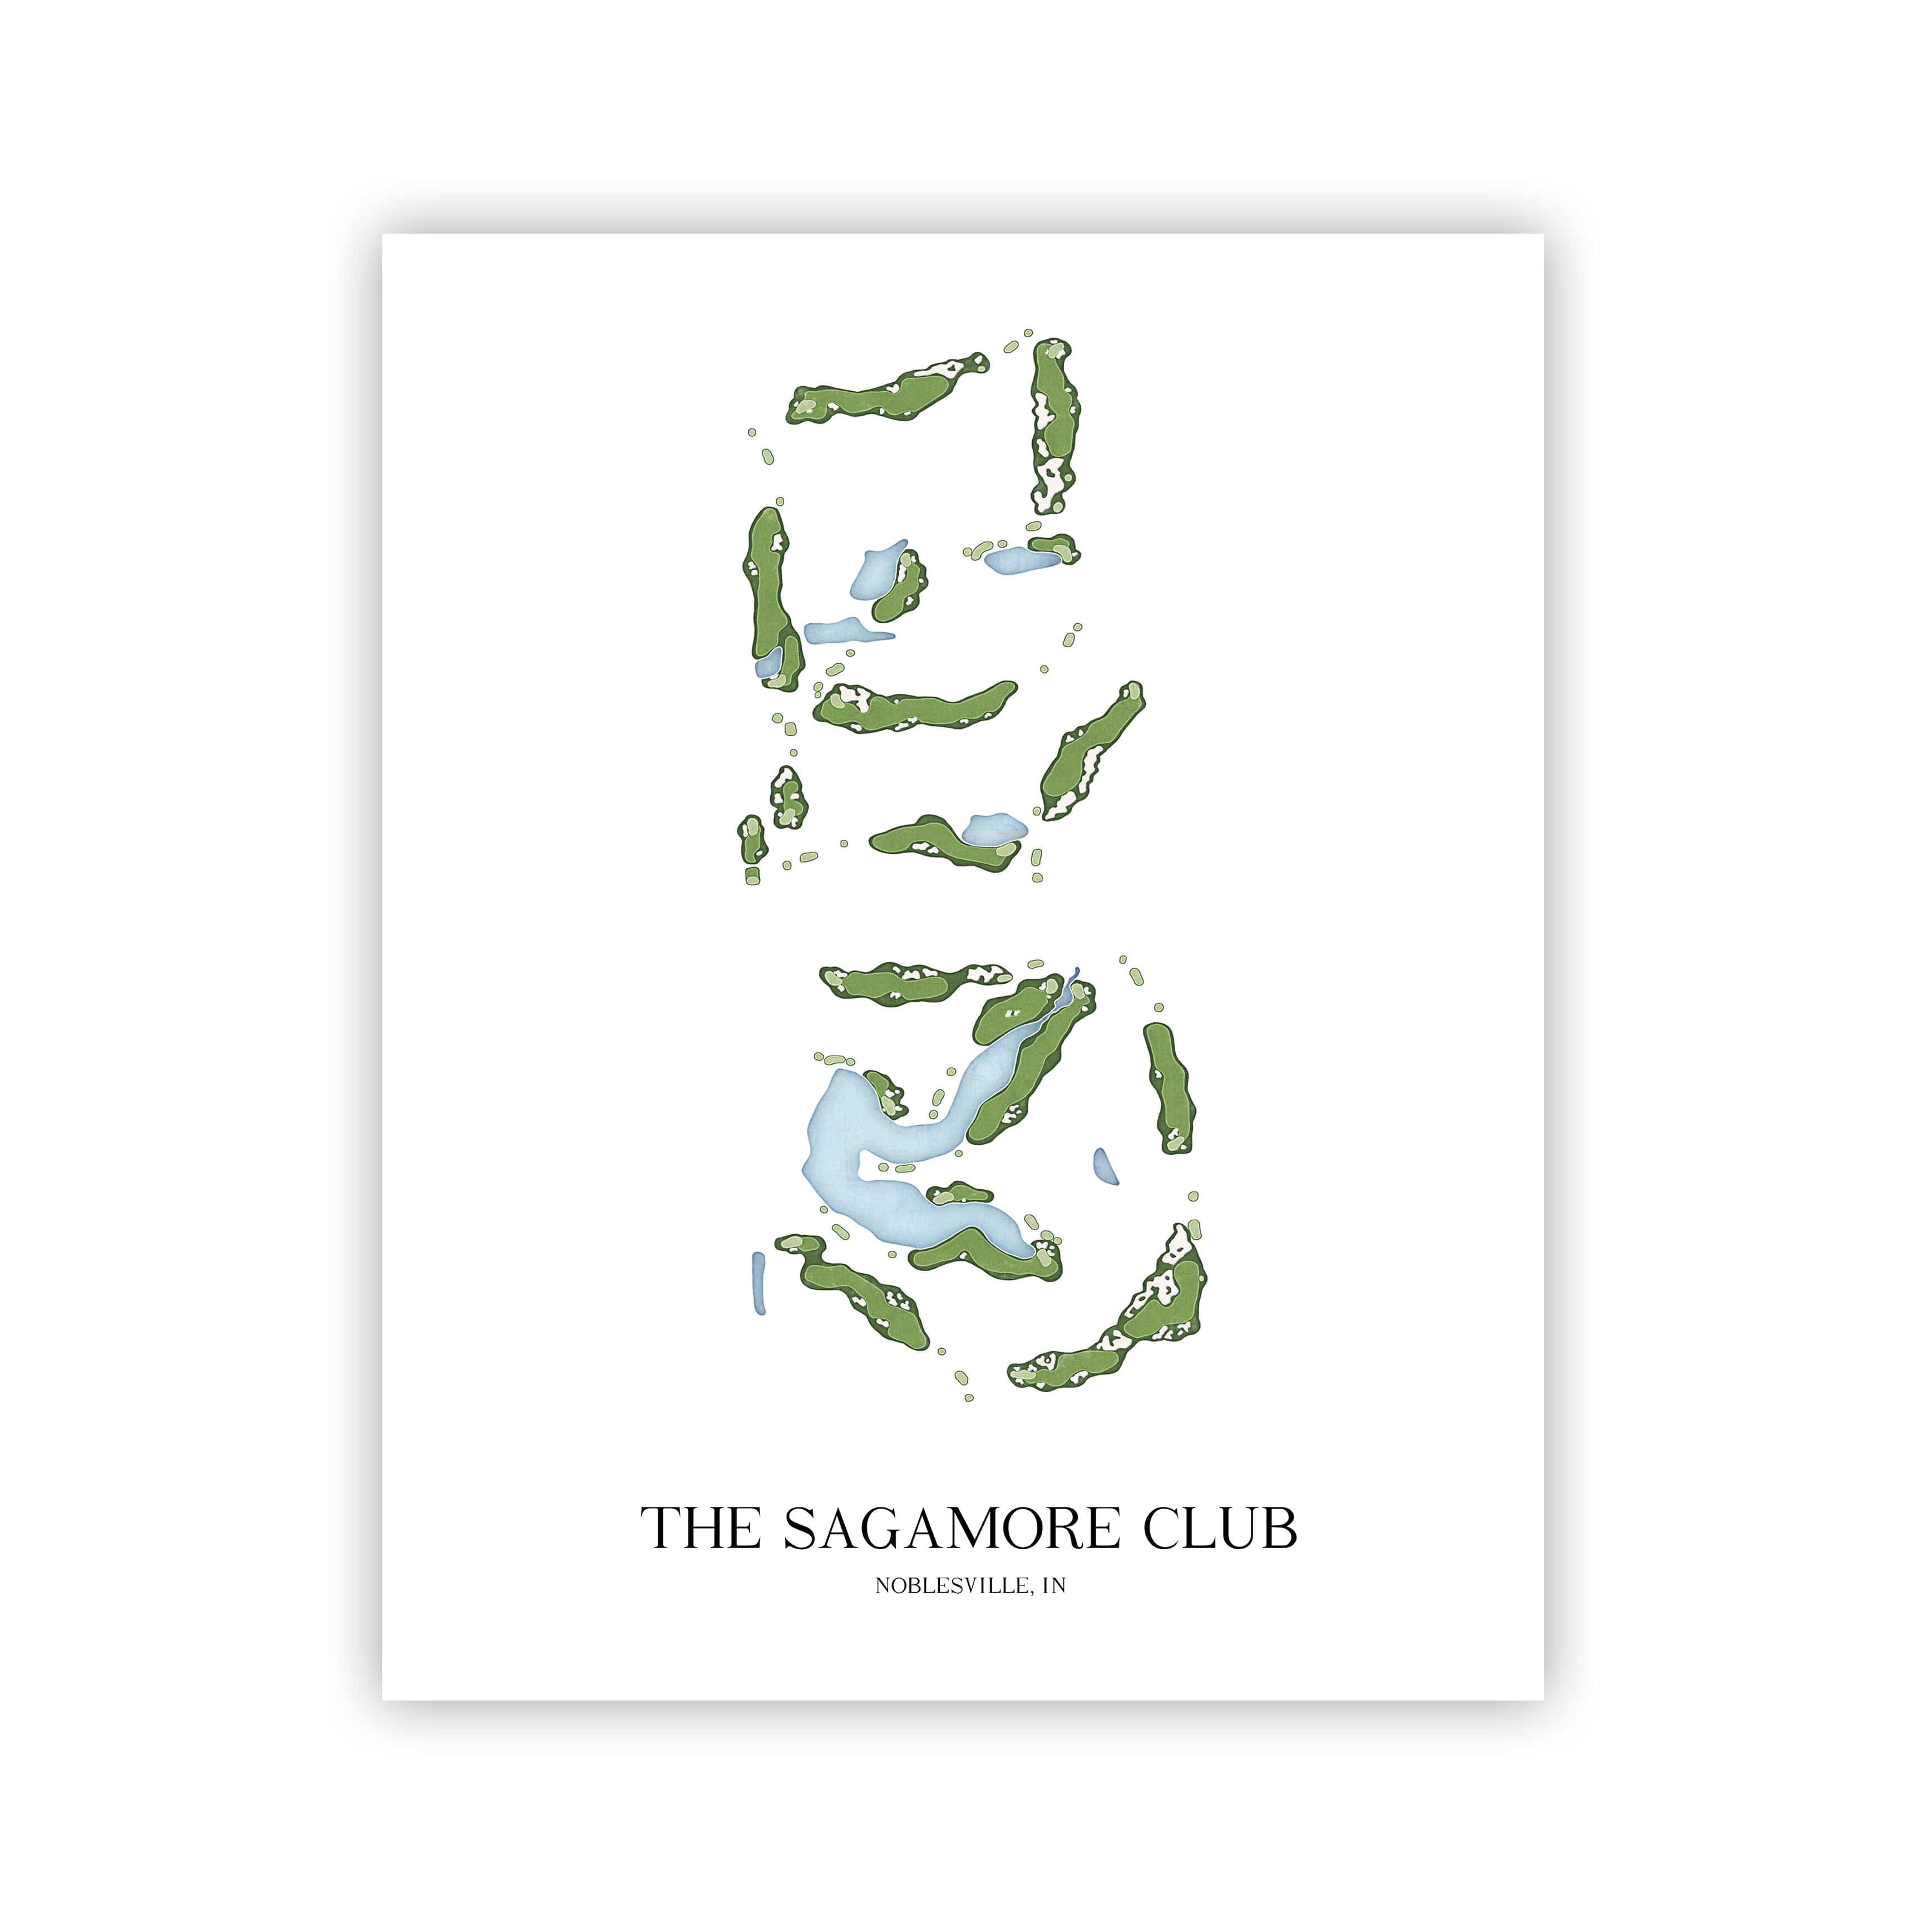 The 19th Hole Golf Shop - Golf Course Prints -  The Sagamore Club Golf Course Map